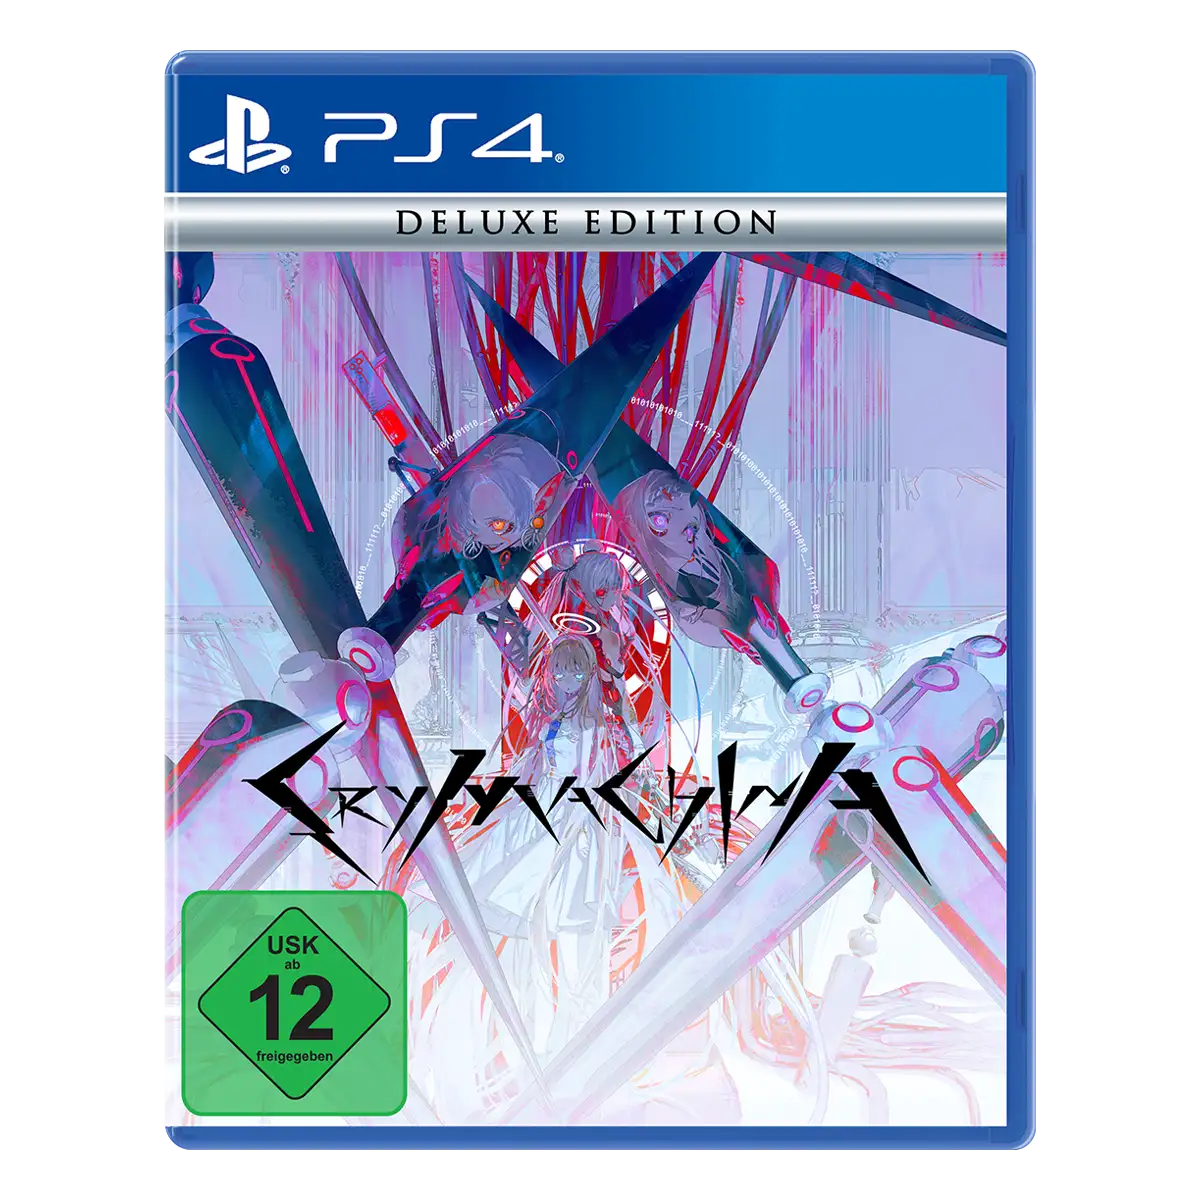 CRYMACHINA - Deluxe Edition (PS4) Cover